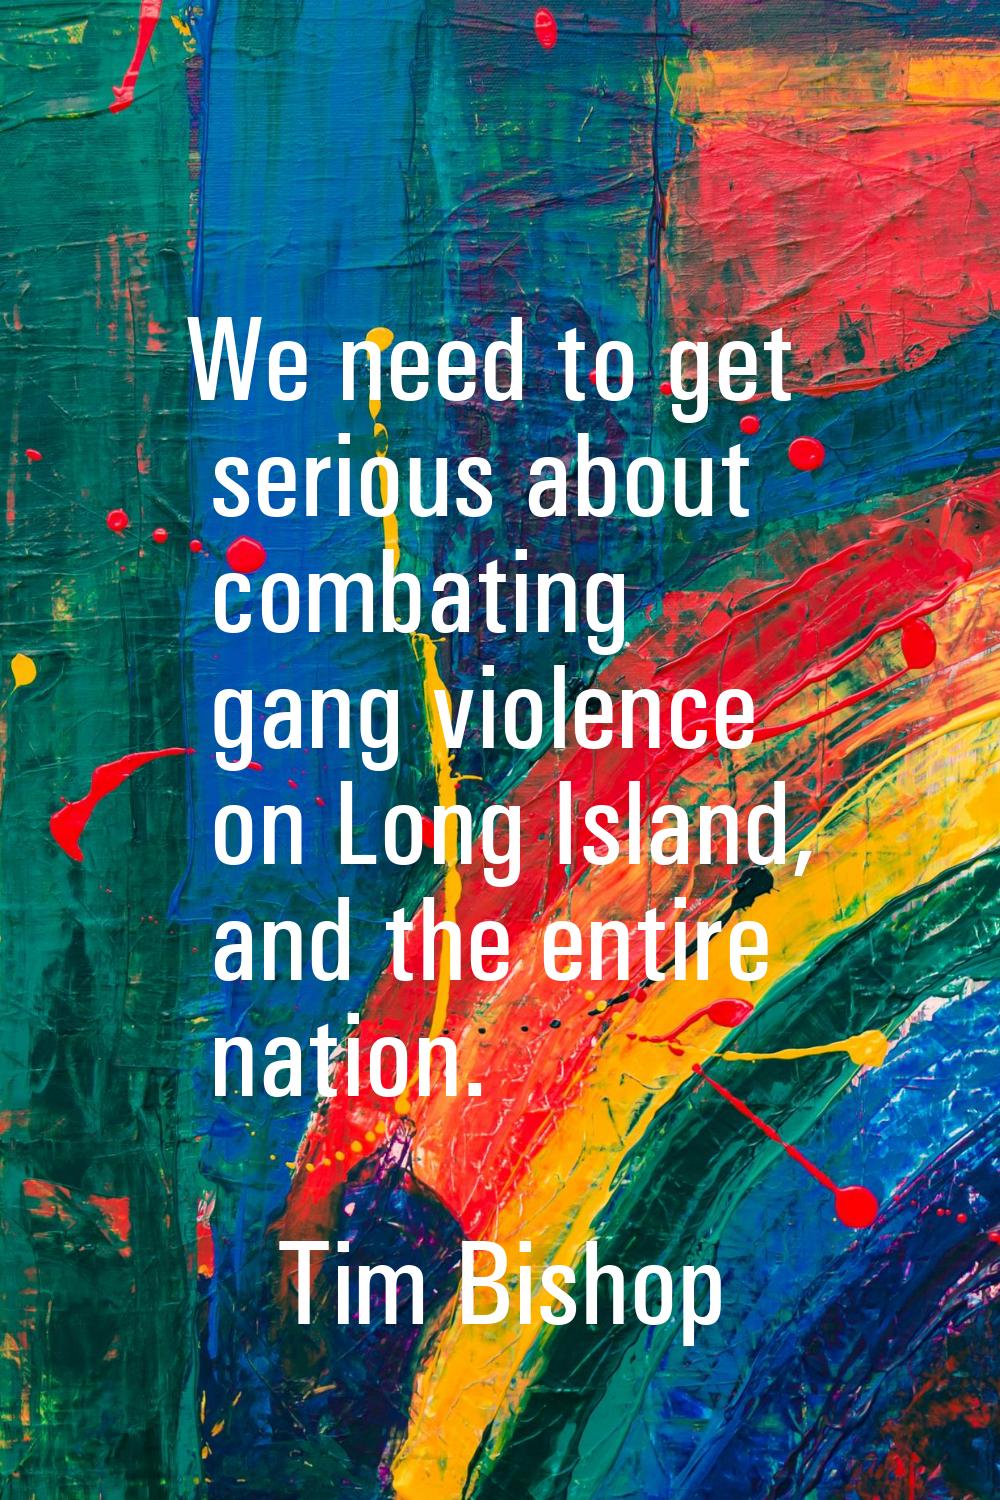 We need to get serious about combating gang violence on Long Island, and the entire nation.